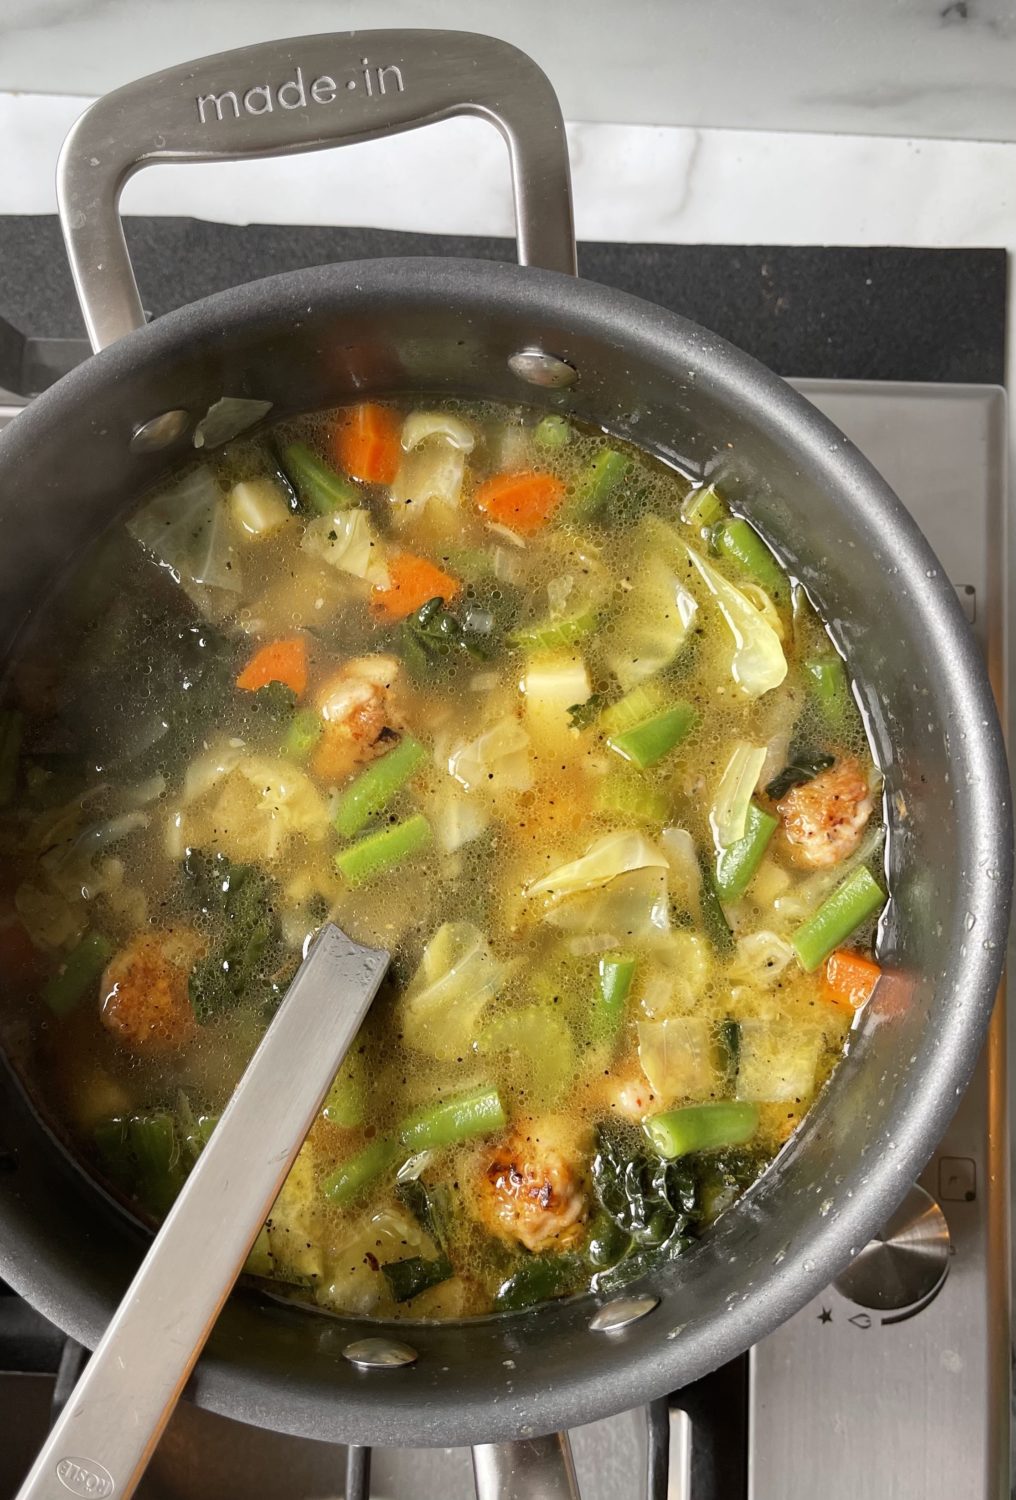 soup in made in saucepan